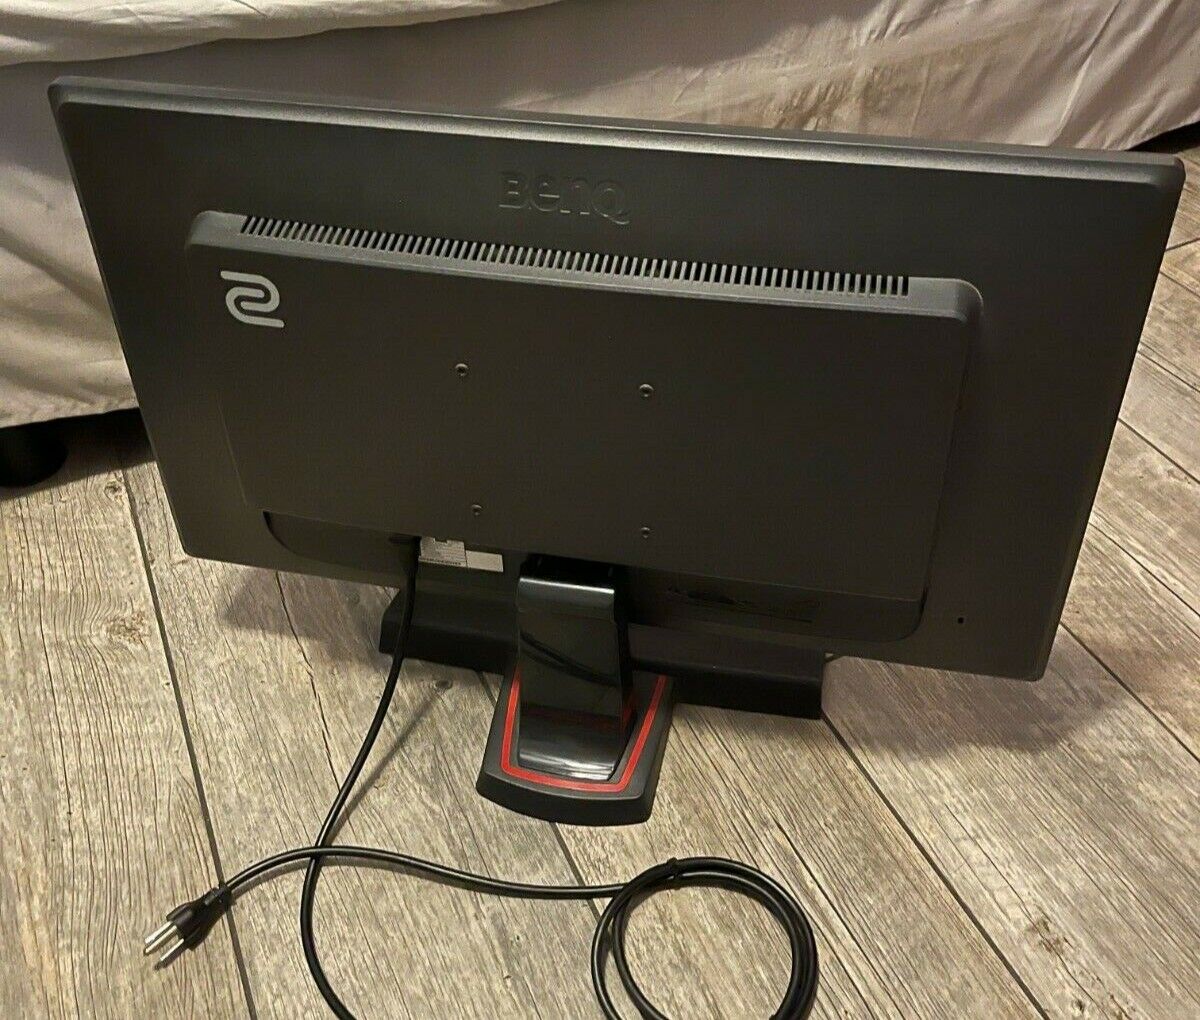 BenQ GL2450-B 1080p 60hz 1ms, 24'' Gaming Monitor - Excellent condition.